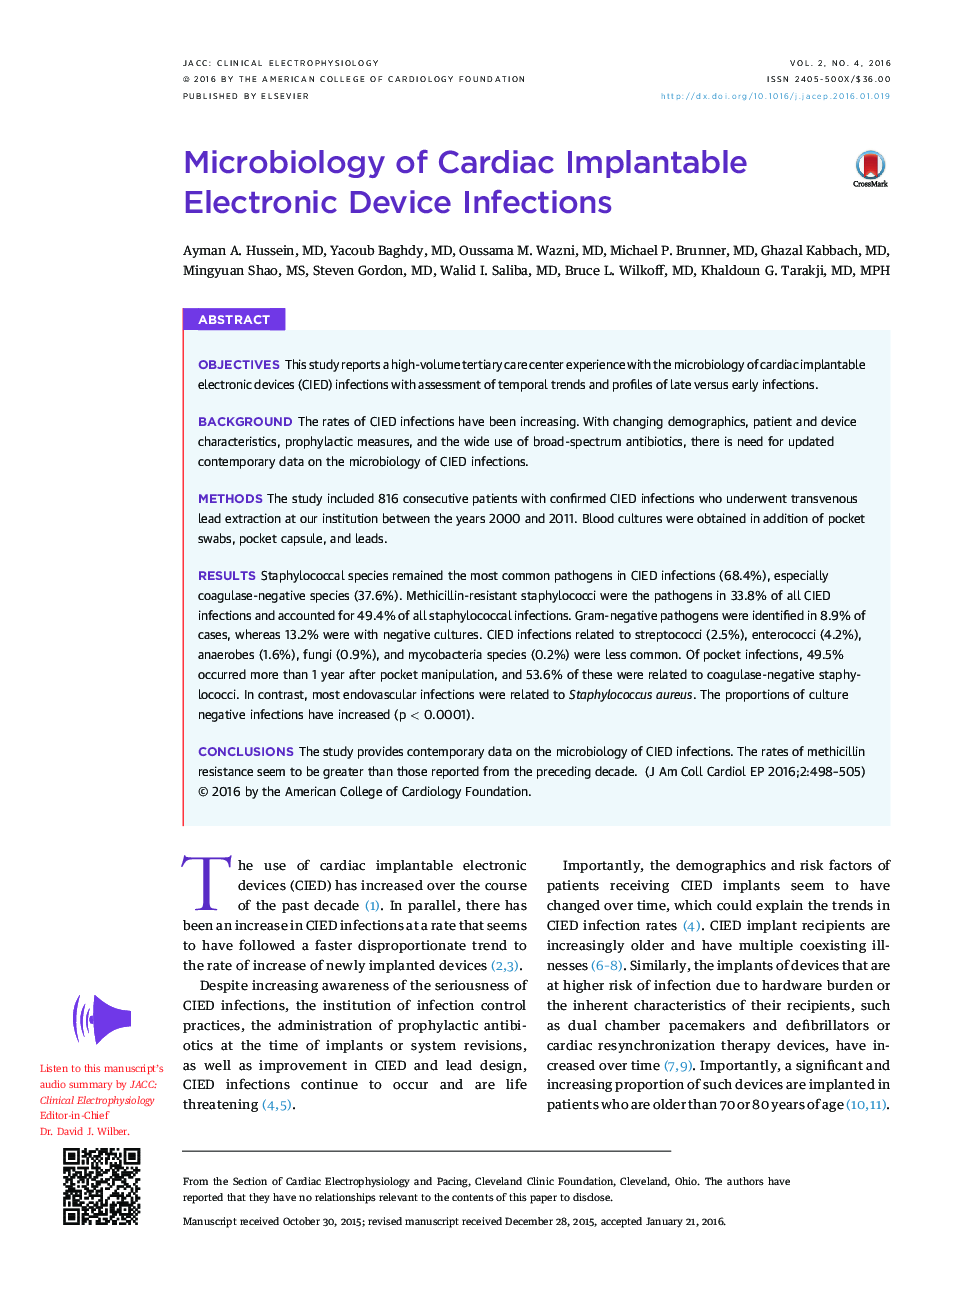 Microbiology of Cardiac Implantable Electronic Device Infections 